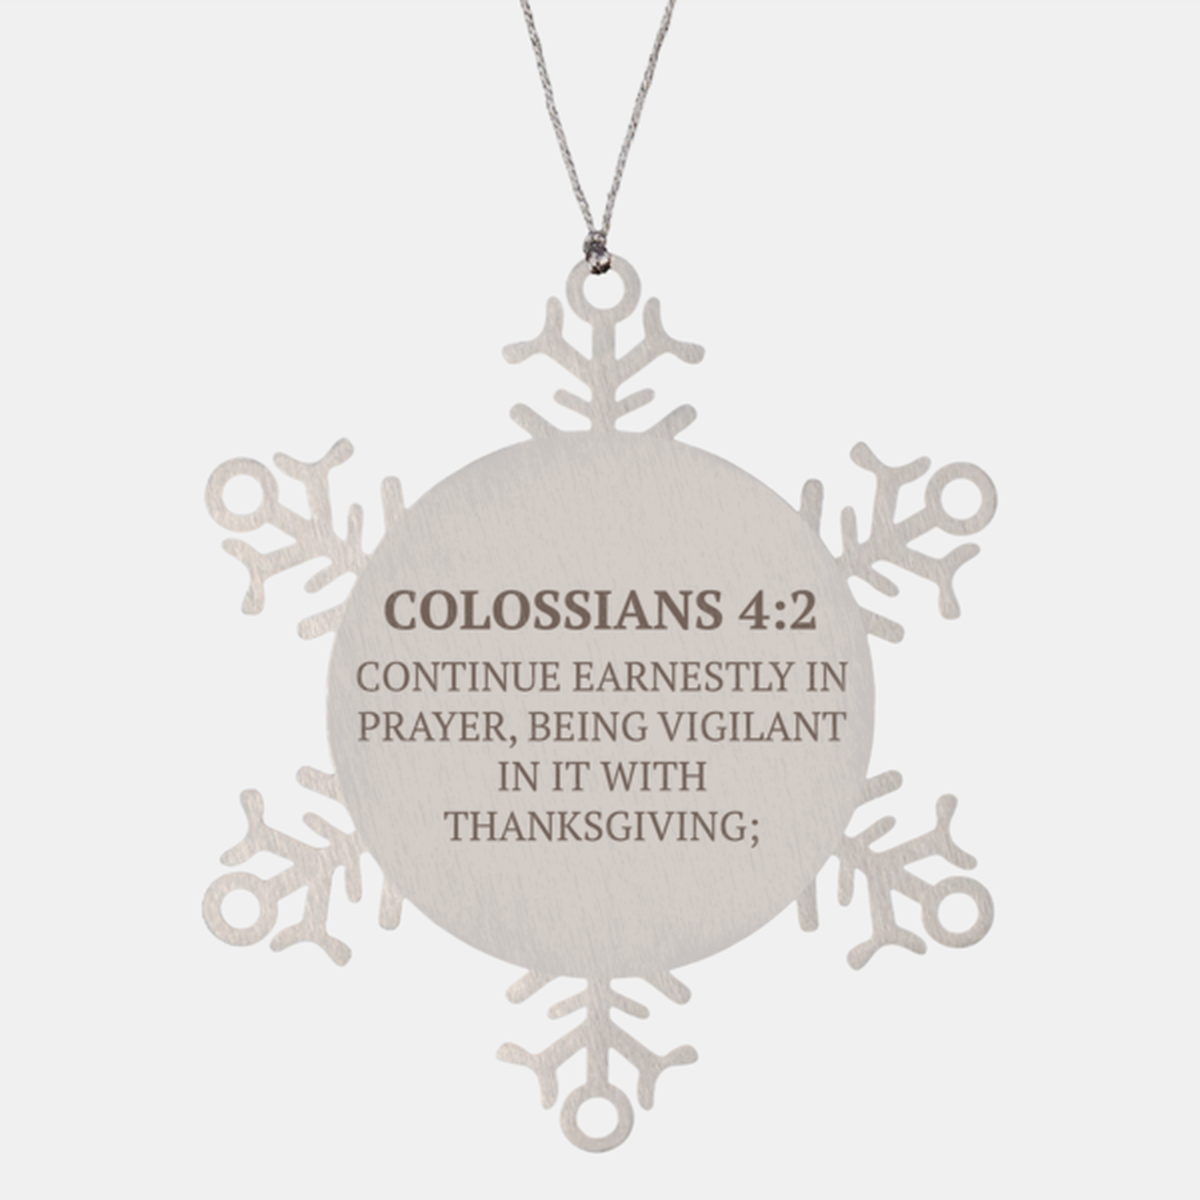 Christian Ornaments For Christmas Tree, Continue Earnestly In Prayer, Being Vigilant, Religious Christmas Decorations, Scripture Ornaments Gifts, Bible Verse Ornament